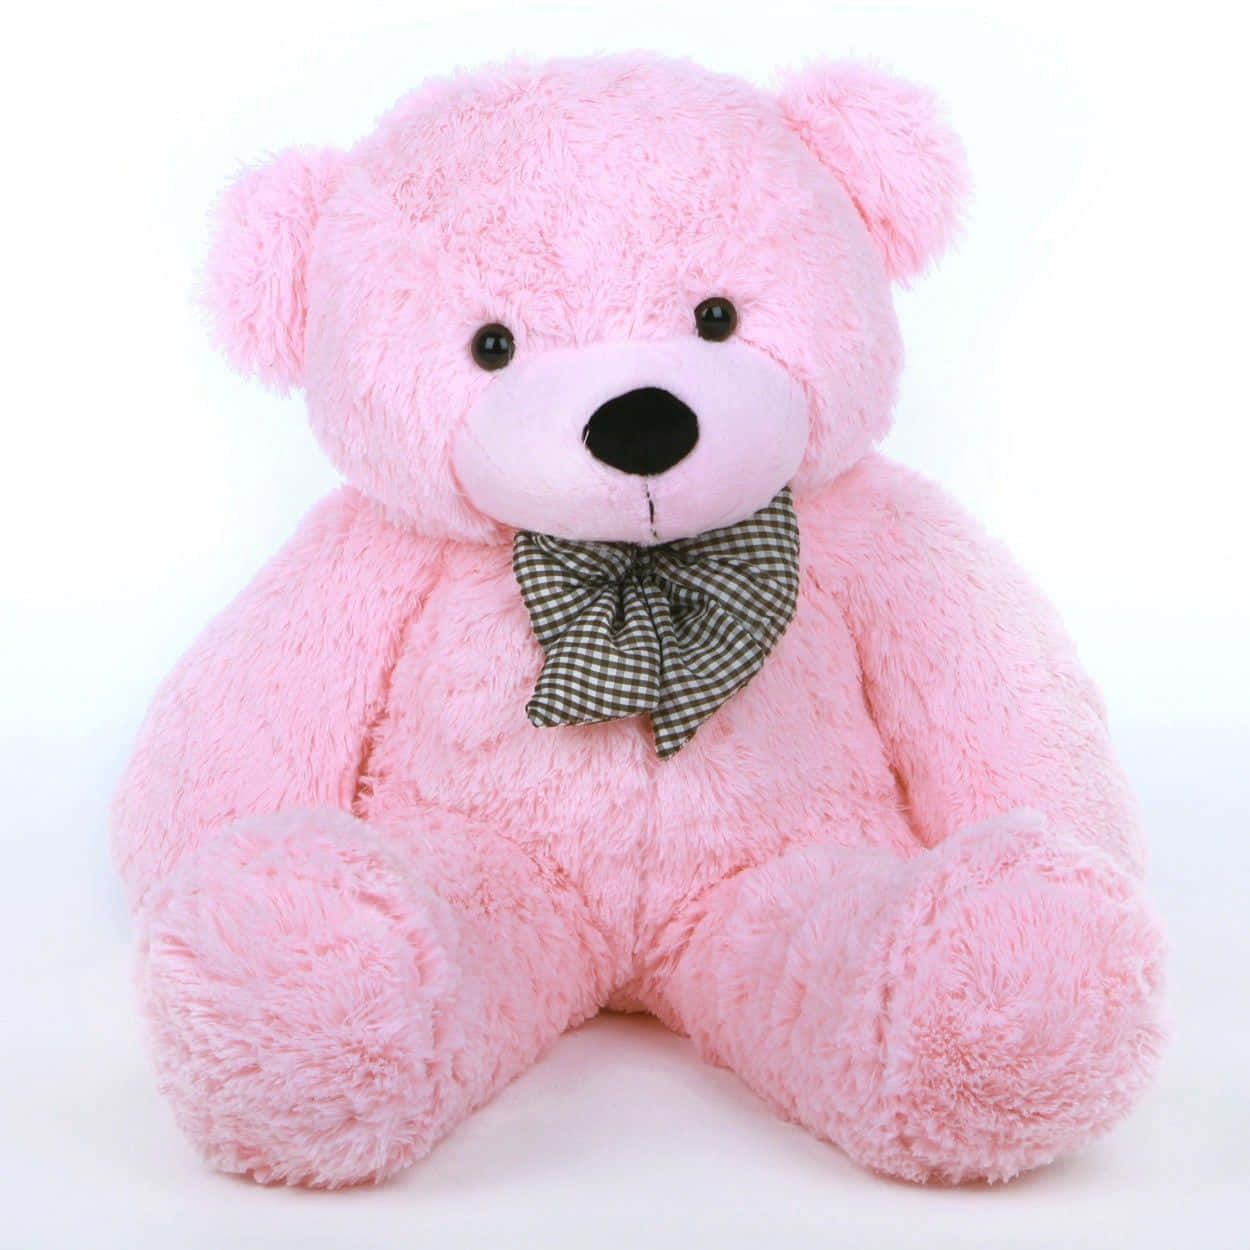 A Charming Pink Teddy Bear With A Loving Heart.